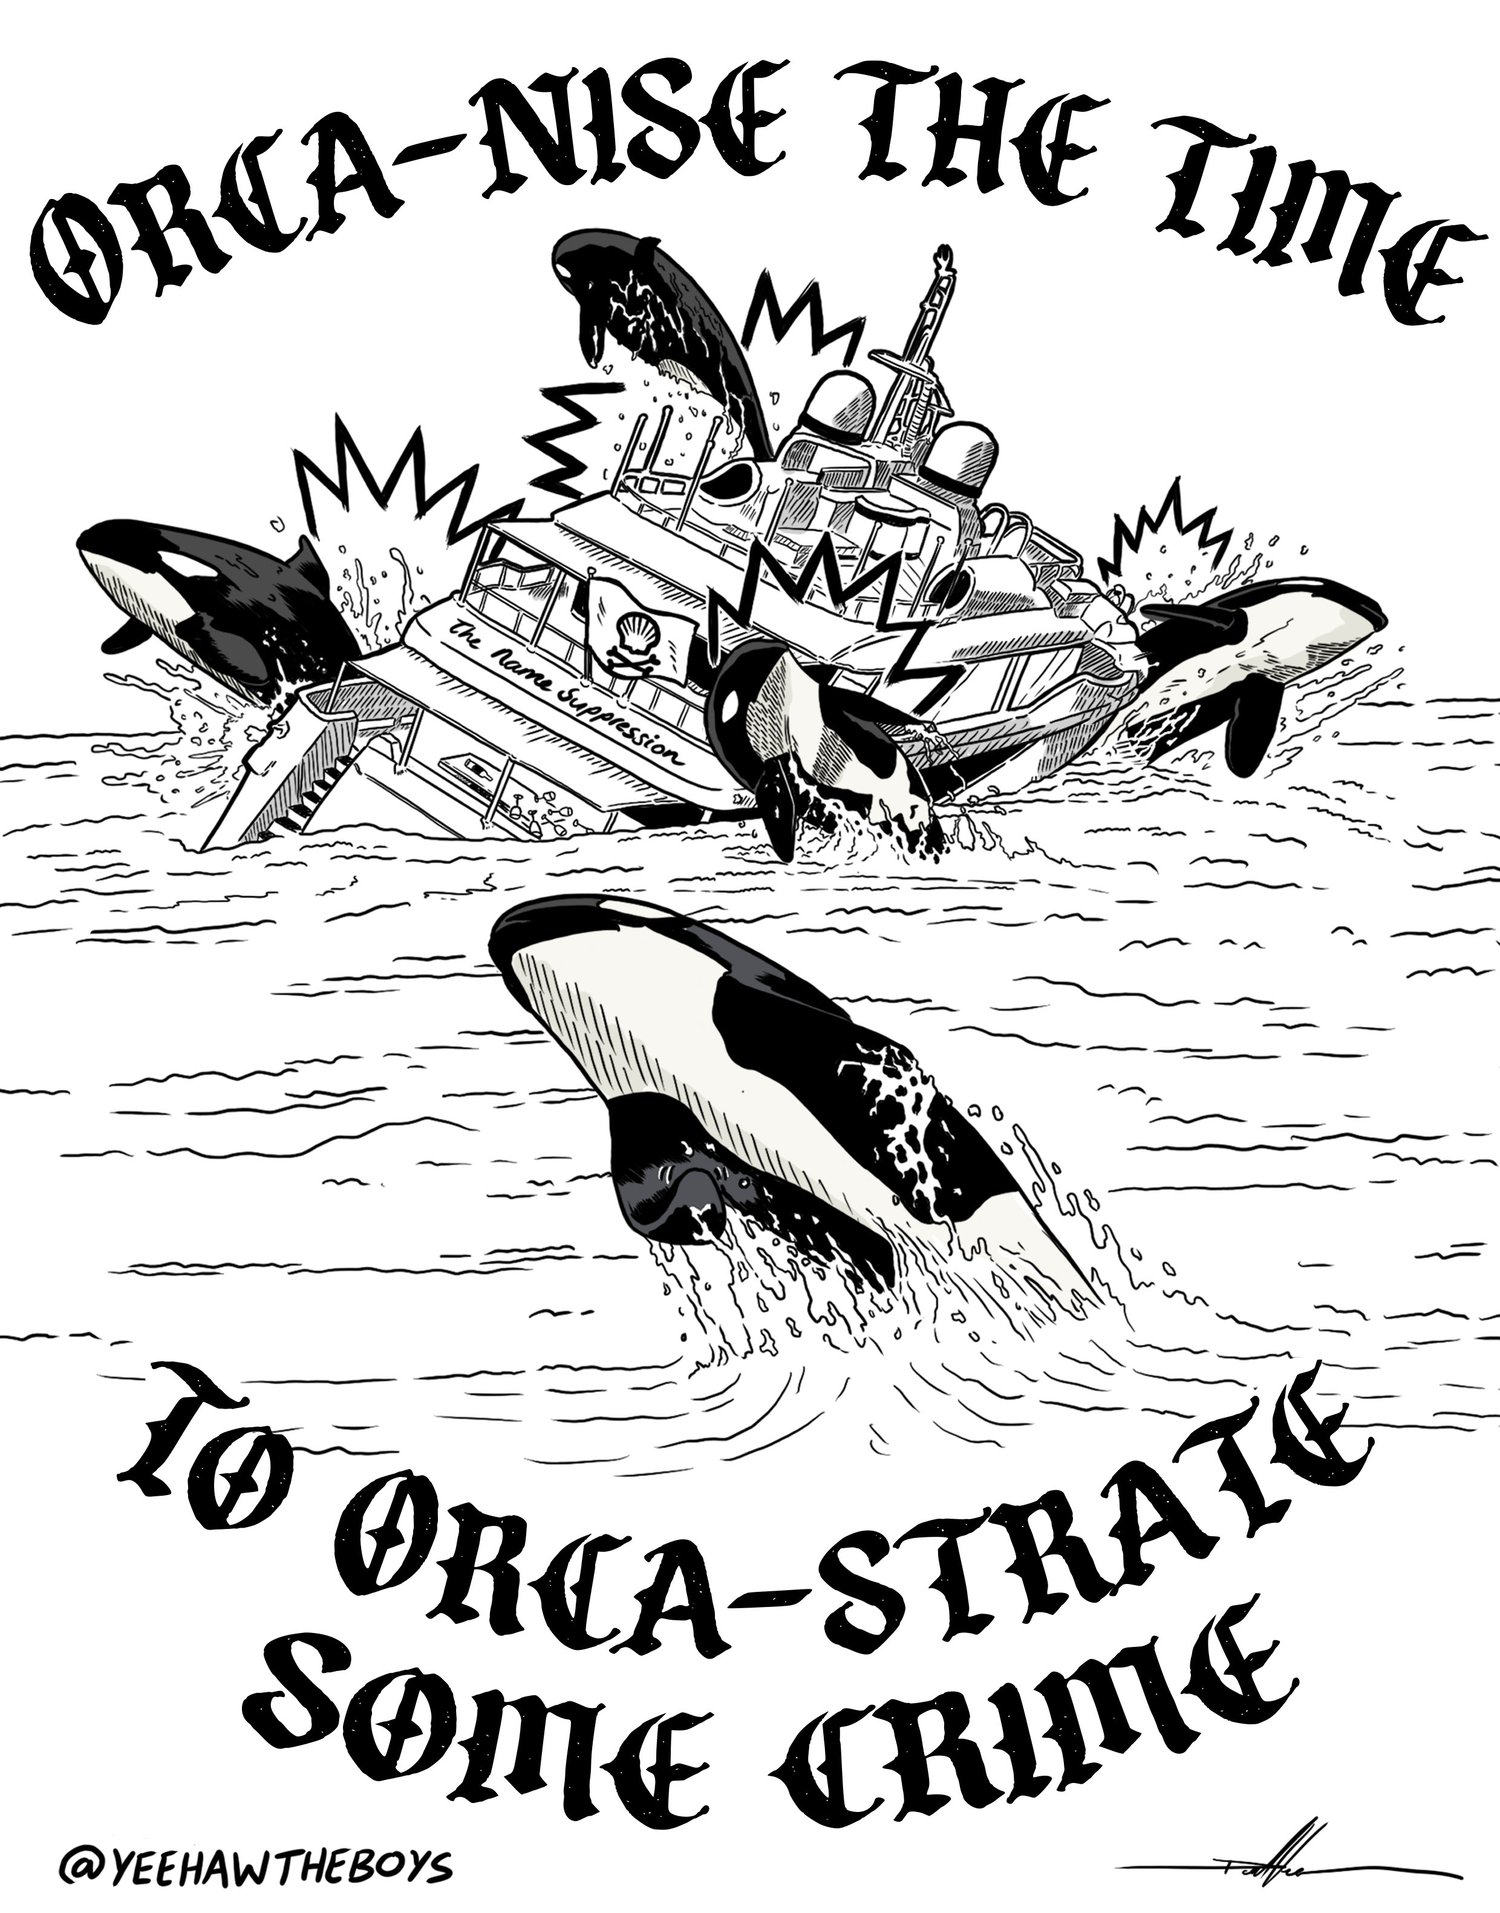 Orca-nise and Orca-Strate